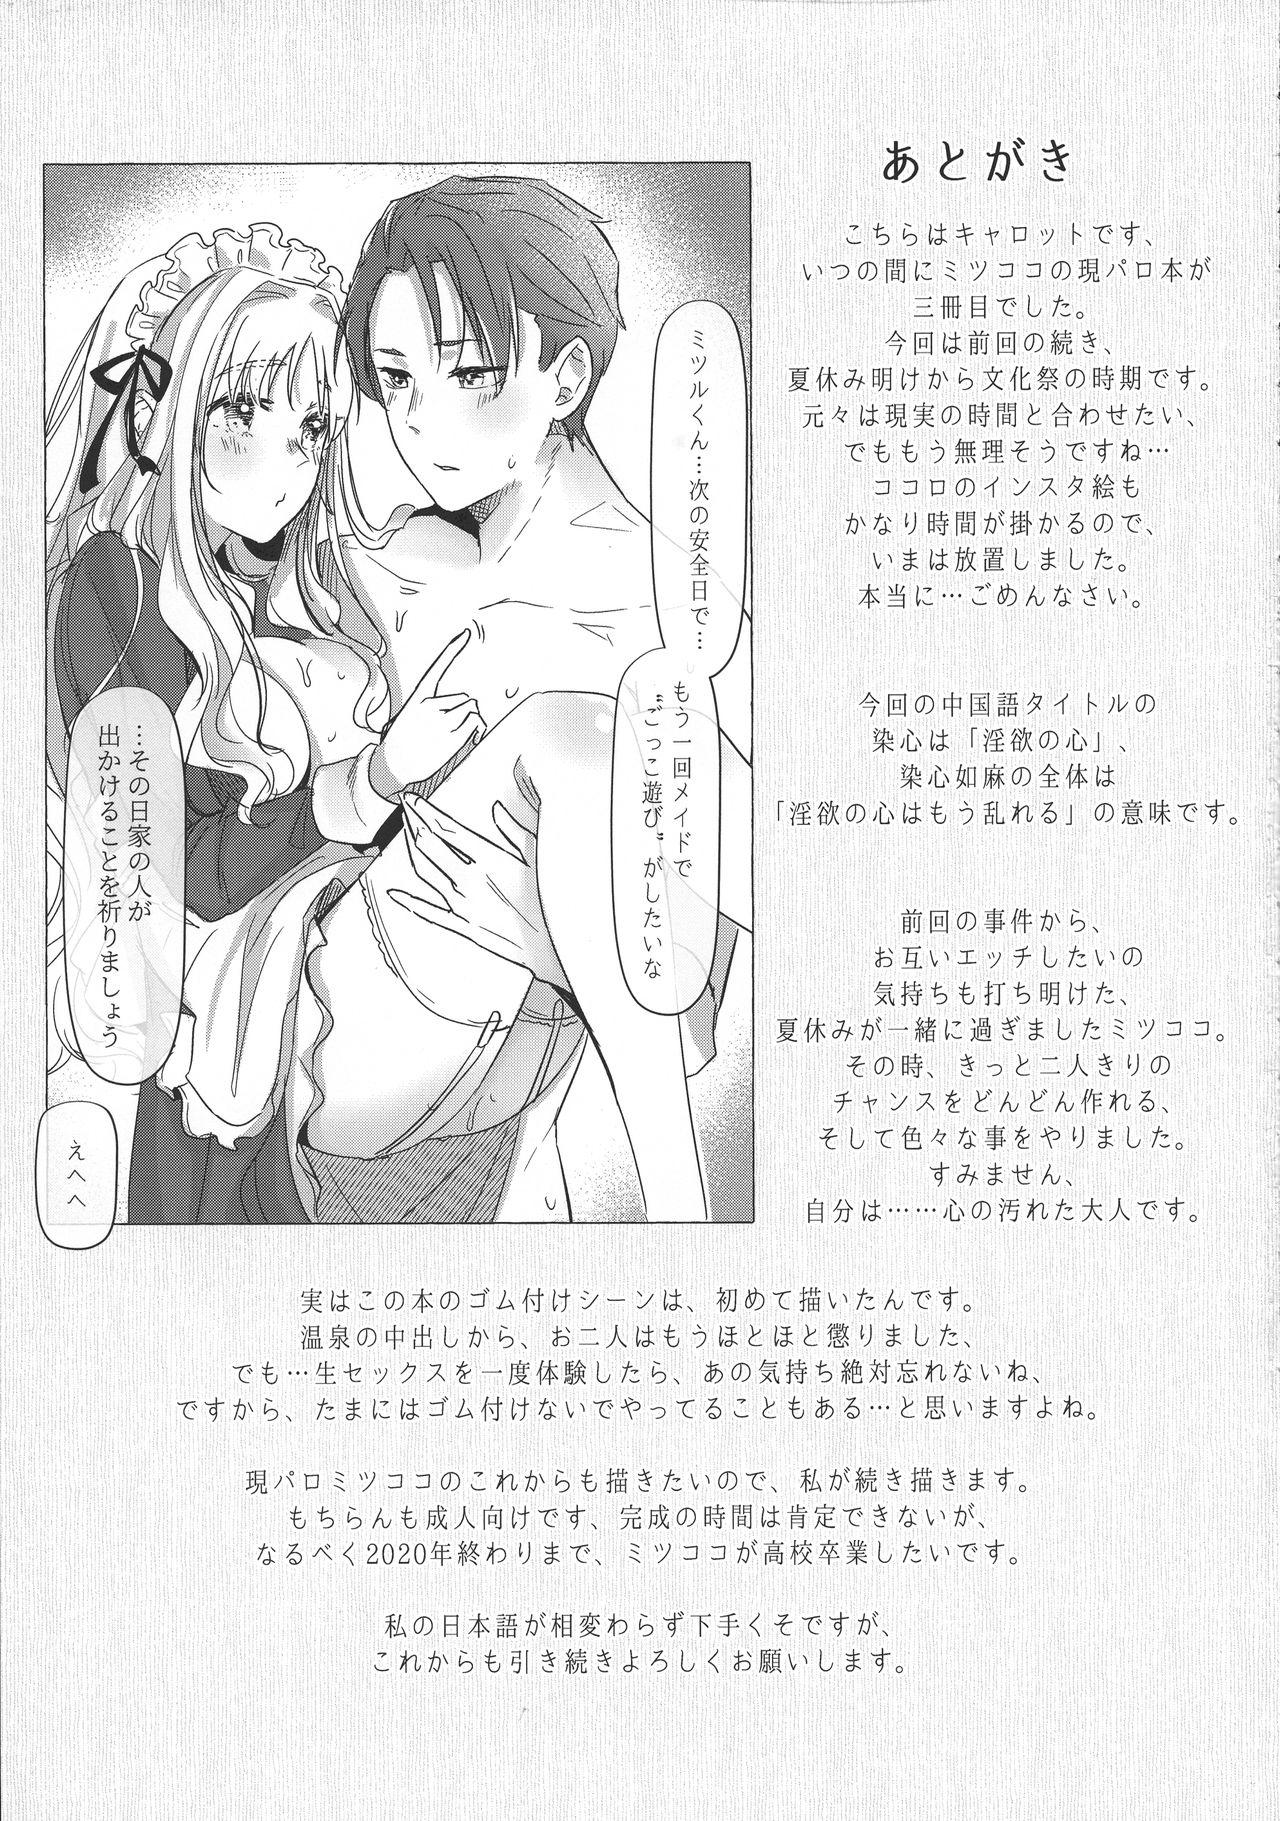 Women 満心総意の躾 - Darling in the franxx Teenage - Page 46